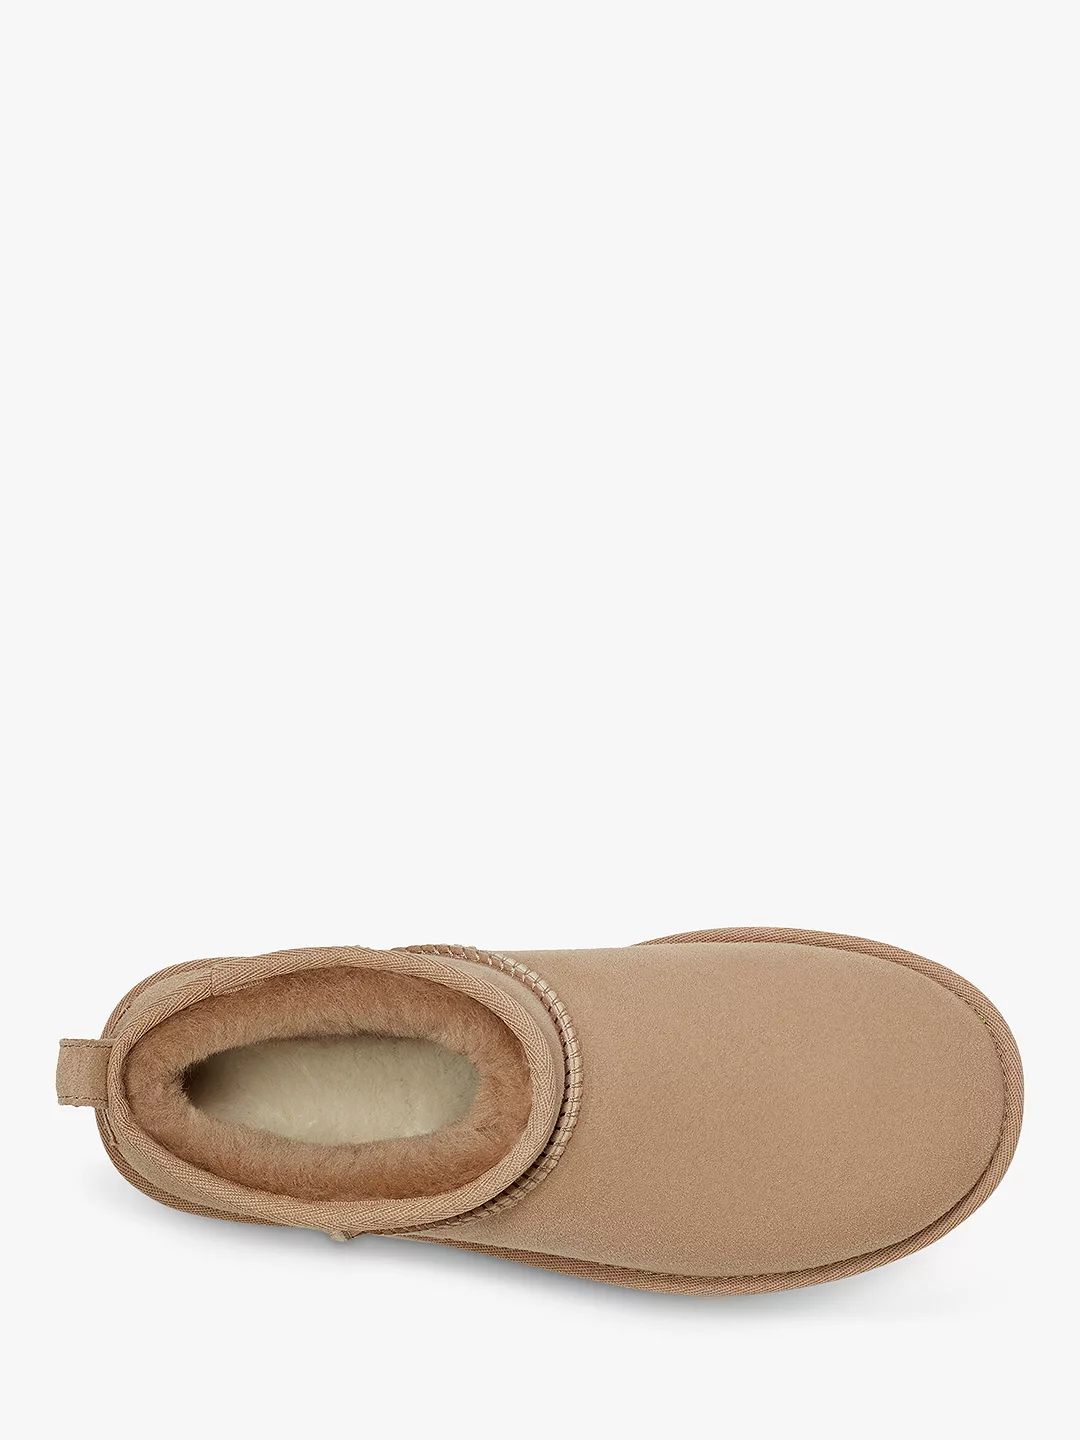 UGG Classic Ultra Mini Sheepskin and Suede Ankle Boots, Sand | John Lewis (UK)